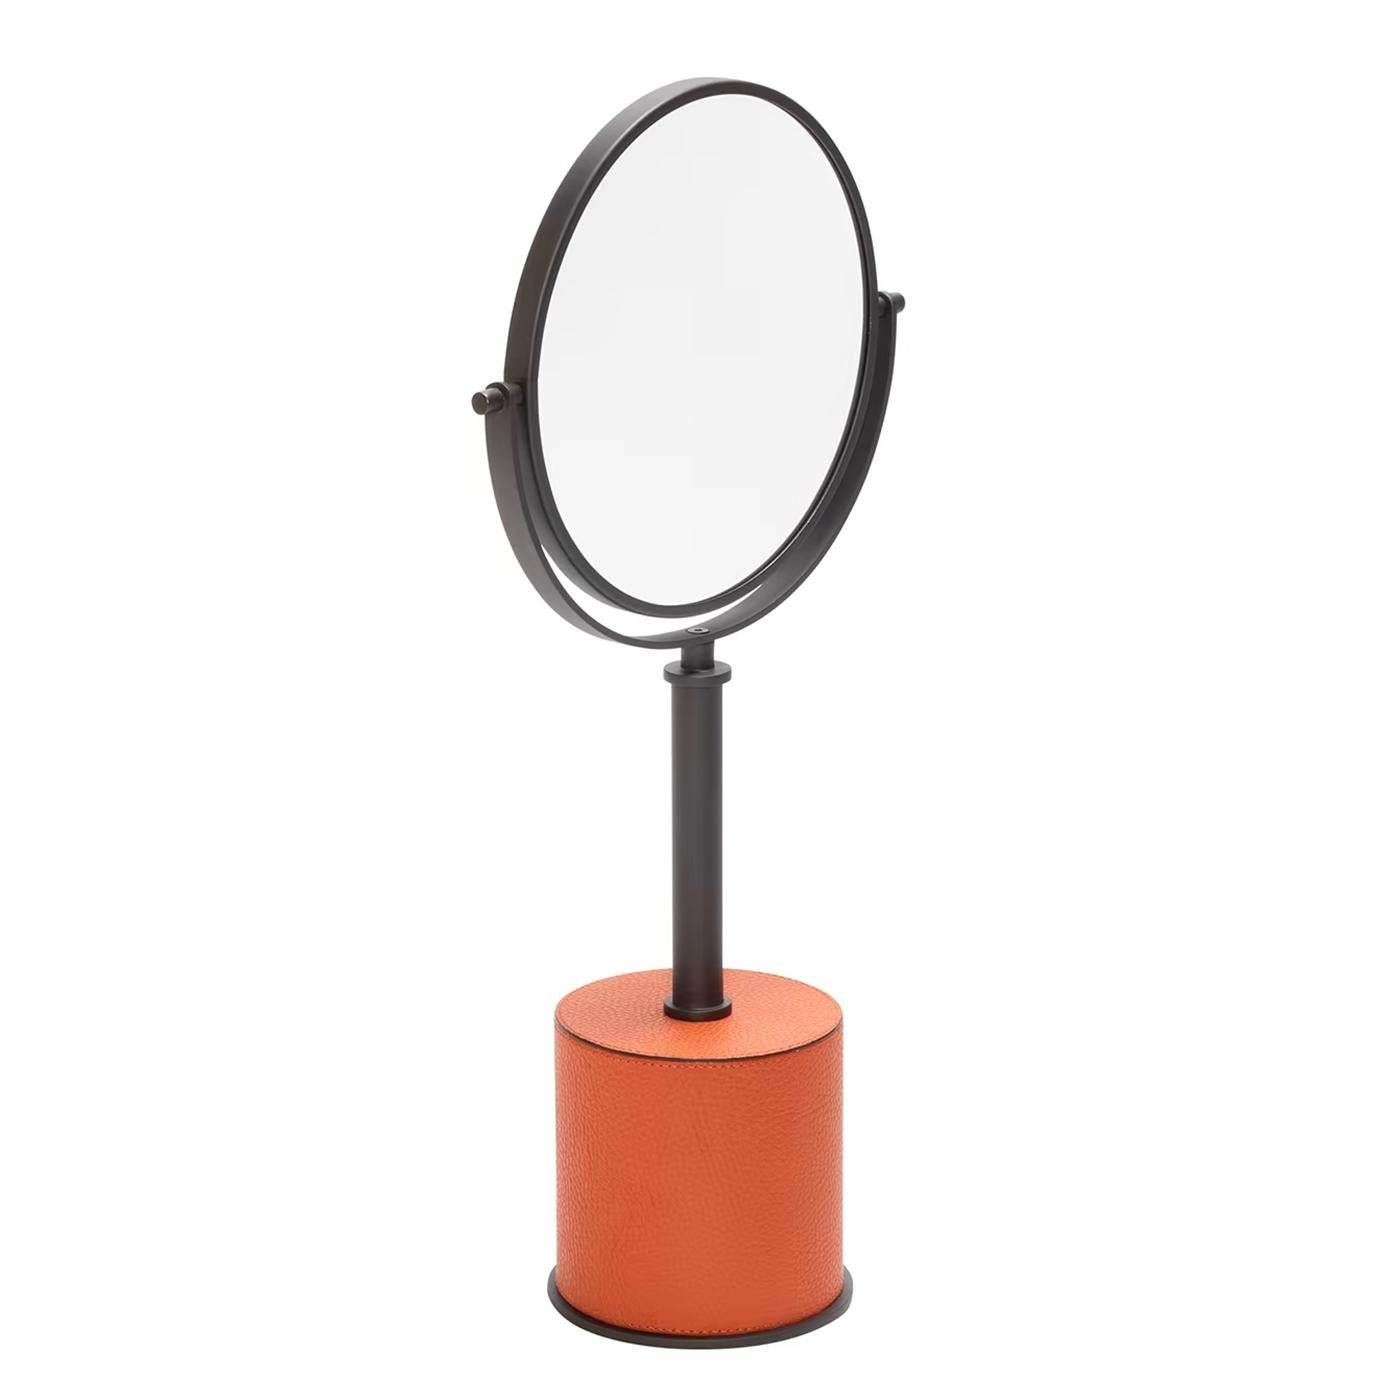 Mirror emma leather stand with structure in bronze finish
and with base covered with genuine italian leather in orange
color. Also available with other leather colors, on request.